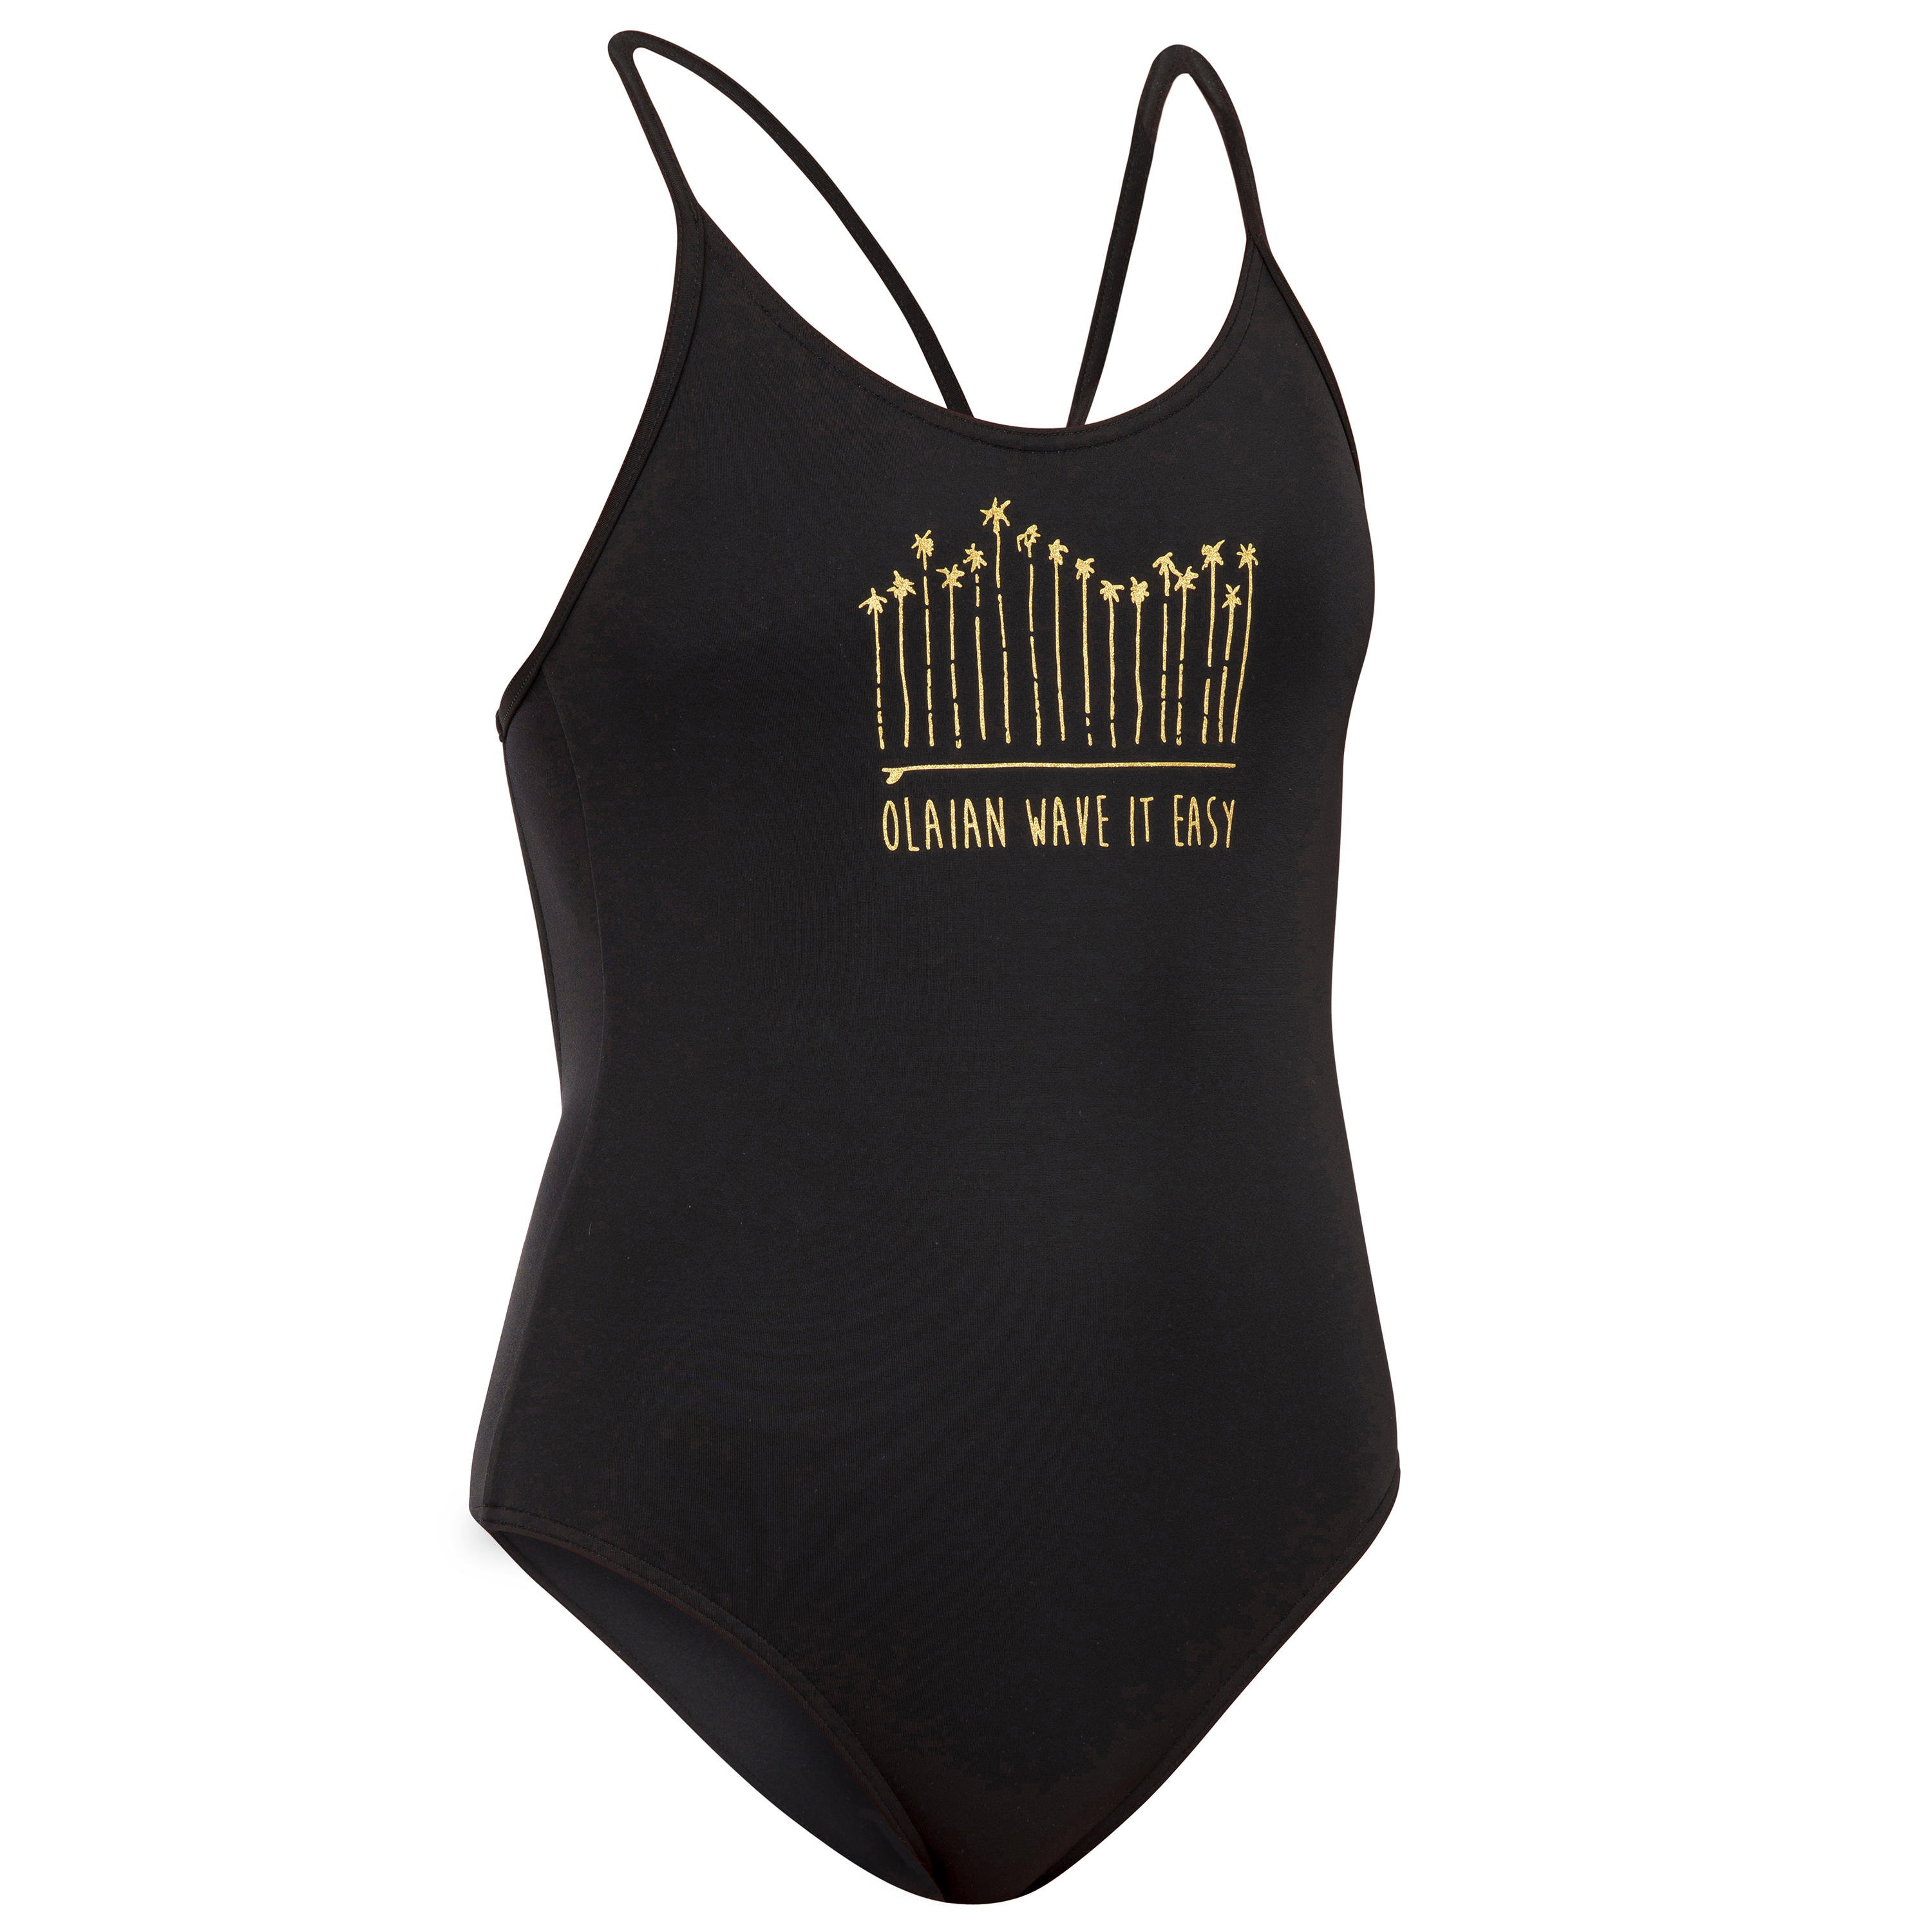 Image of Girls’ One-Piece Surfing Swimsuit - 100 Black